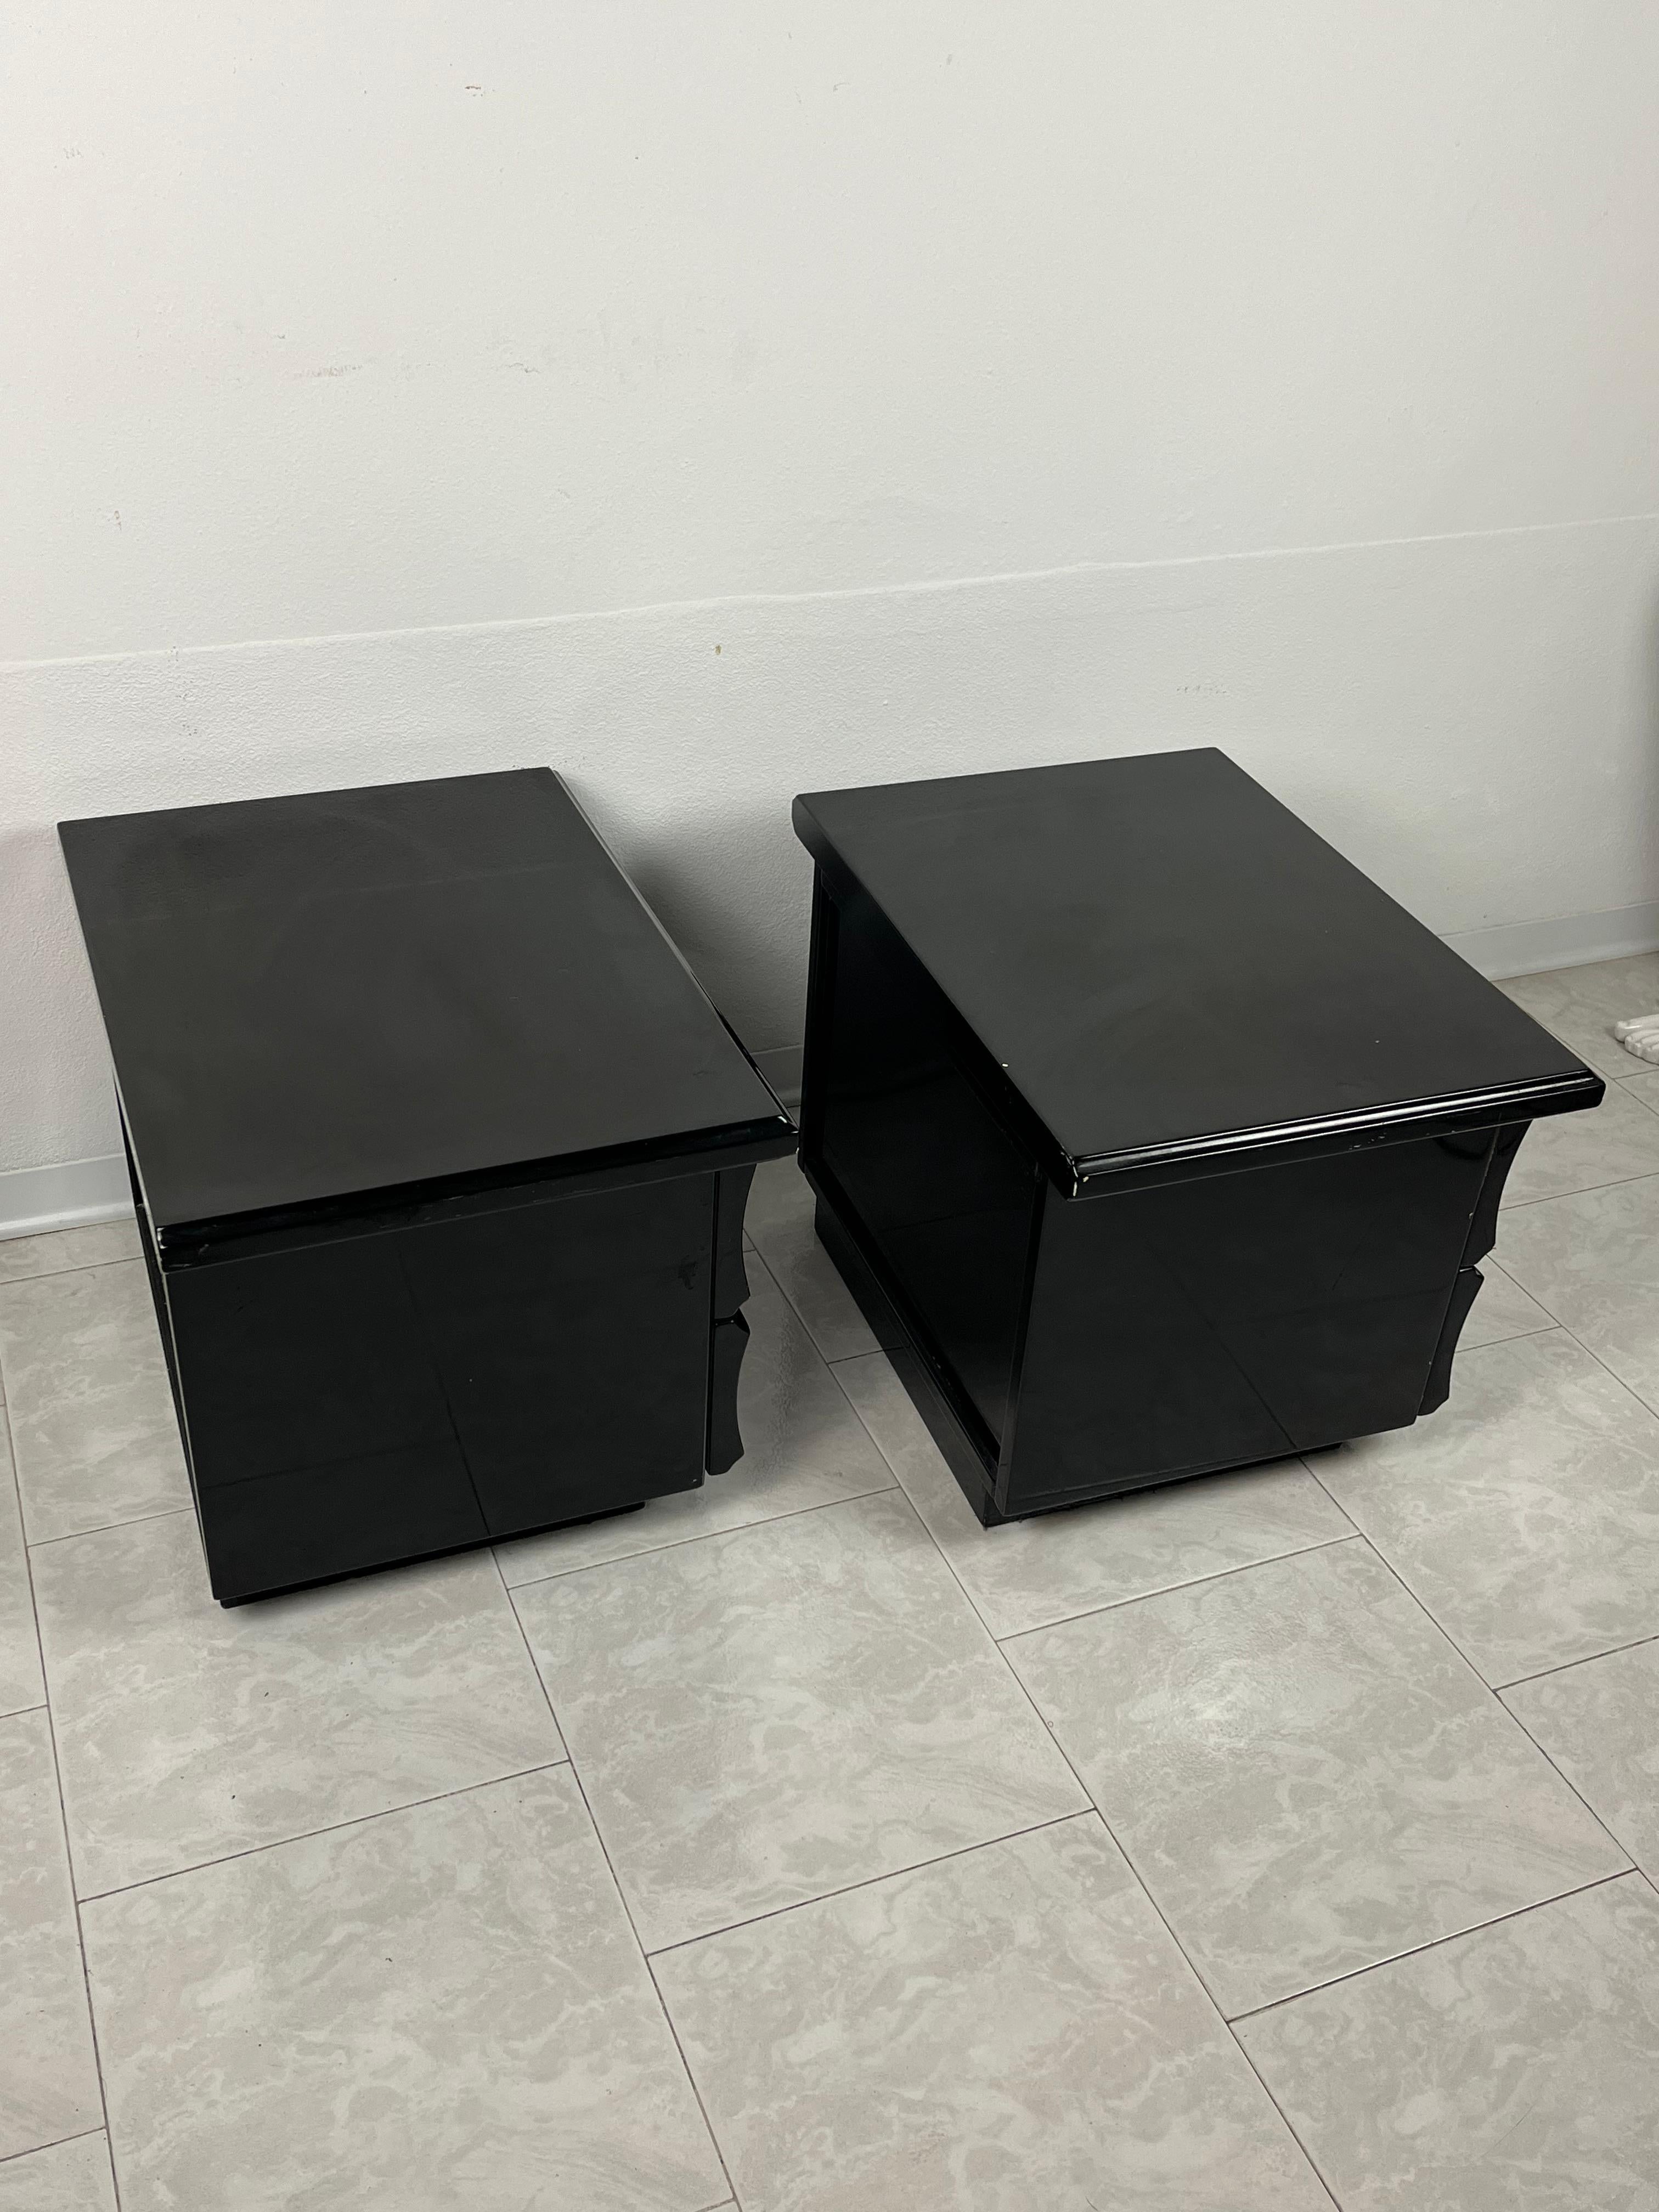 Late 20th Century Pair of Italian Design Bedside Tables, Italy, 1970s For Sale